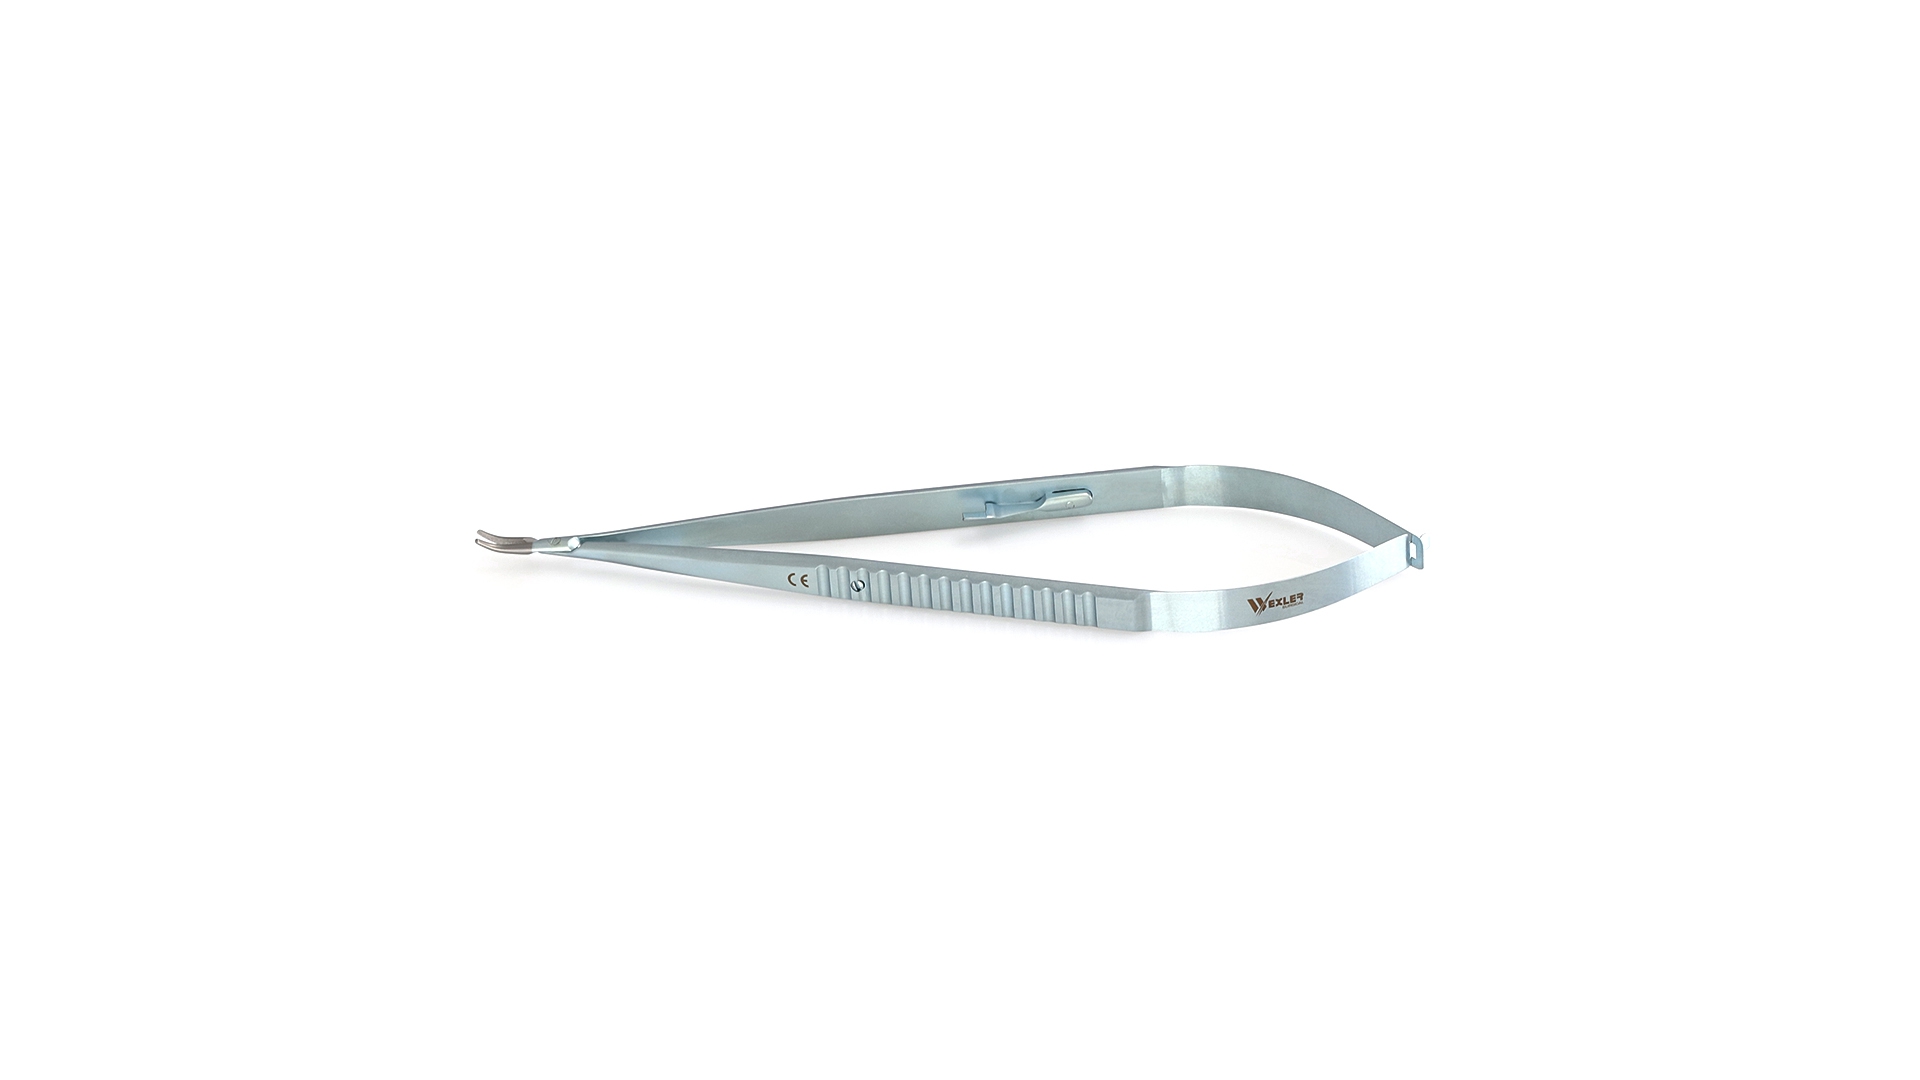 Castroviejo Micro Needle Holder - Curved Short TC coated jaws